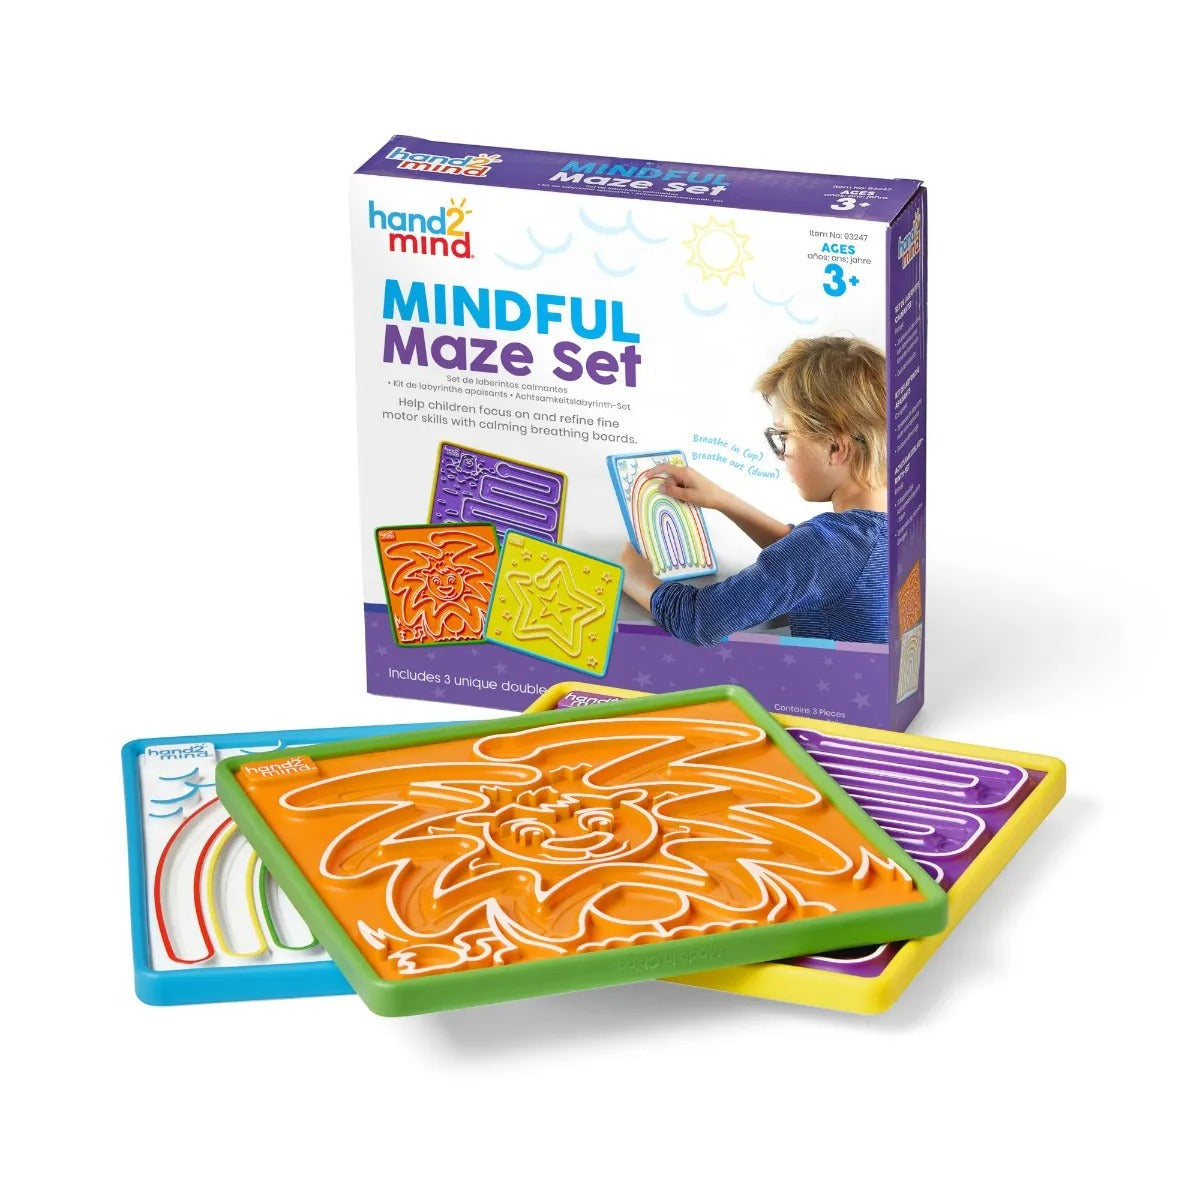 Mindful Maze Set, The Mindful Maze Set helps kids practise managing their emotions and cultivate mindfulness through 6 guided breathing exercises. The Mindful Maze Set comes with 3 double-sided boards that each have an engaging design. Children trace the designs with their fingers, breathing in and out as directed by the design of the board. Help children with social-emotional learning (SEL) using this set of boards developed to introduce mindful breathing for kids. The set of 3 double-sided boards offers 6